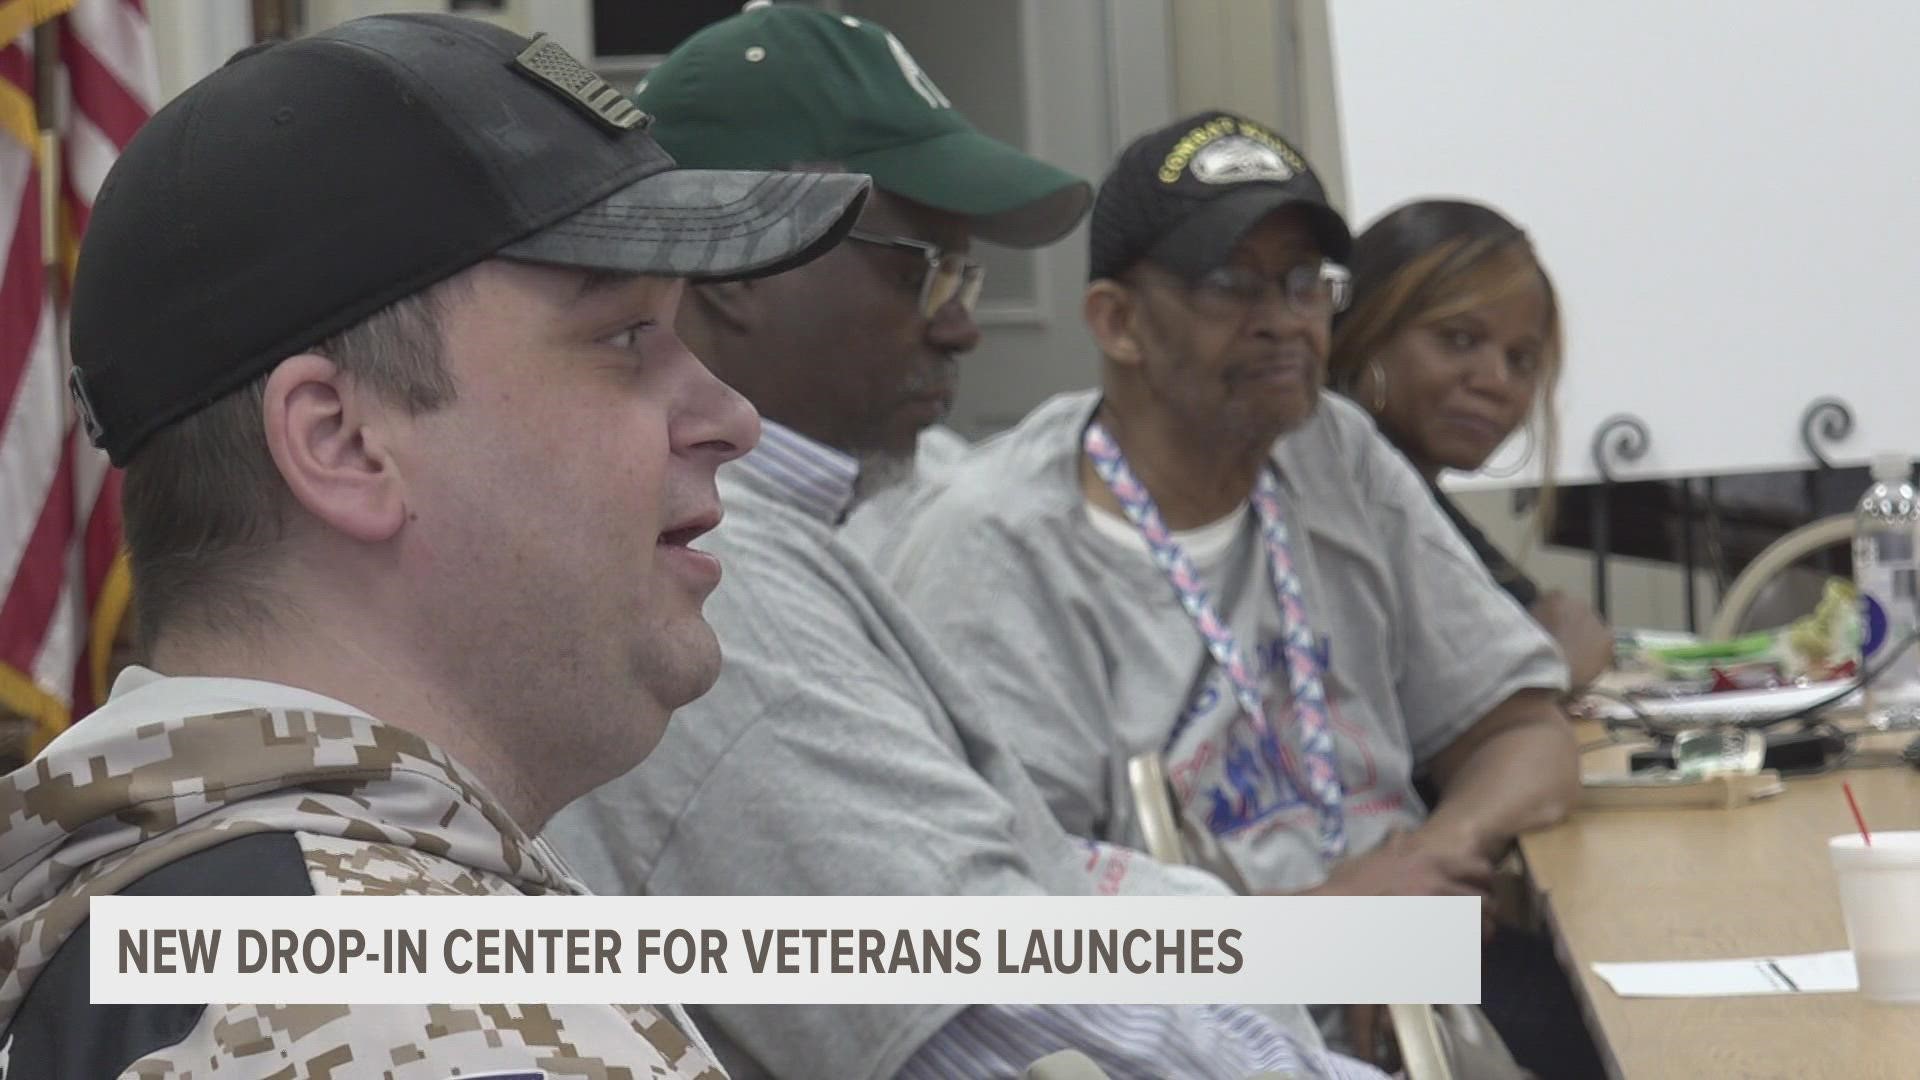 The organization officially formed earlier this year and they want their own location, which can be a place where veterans can call home.